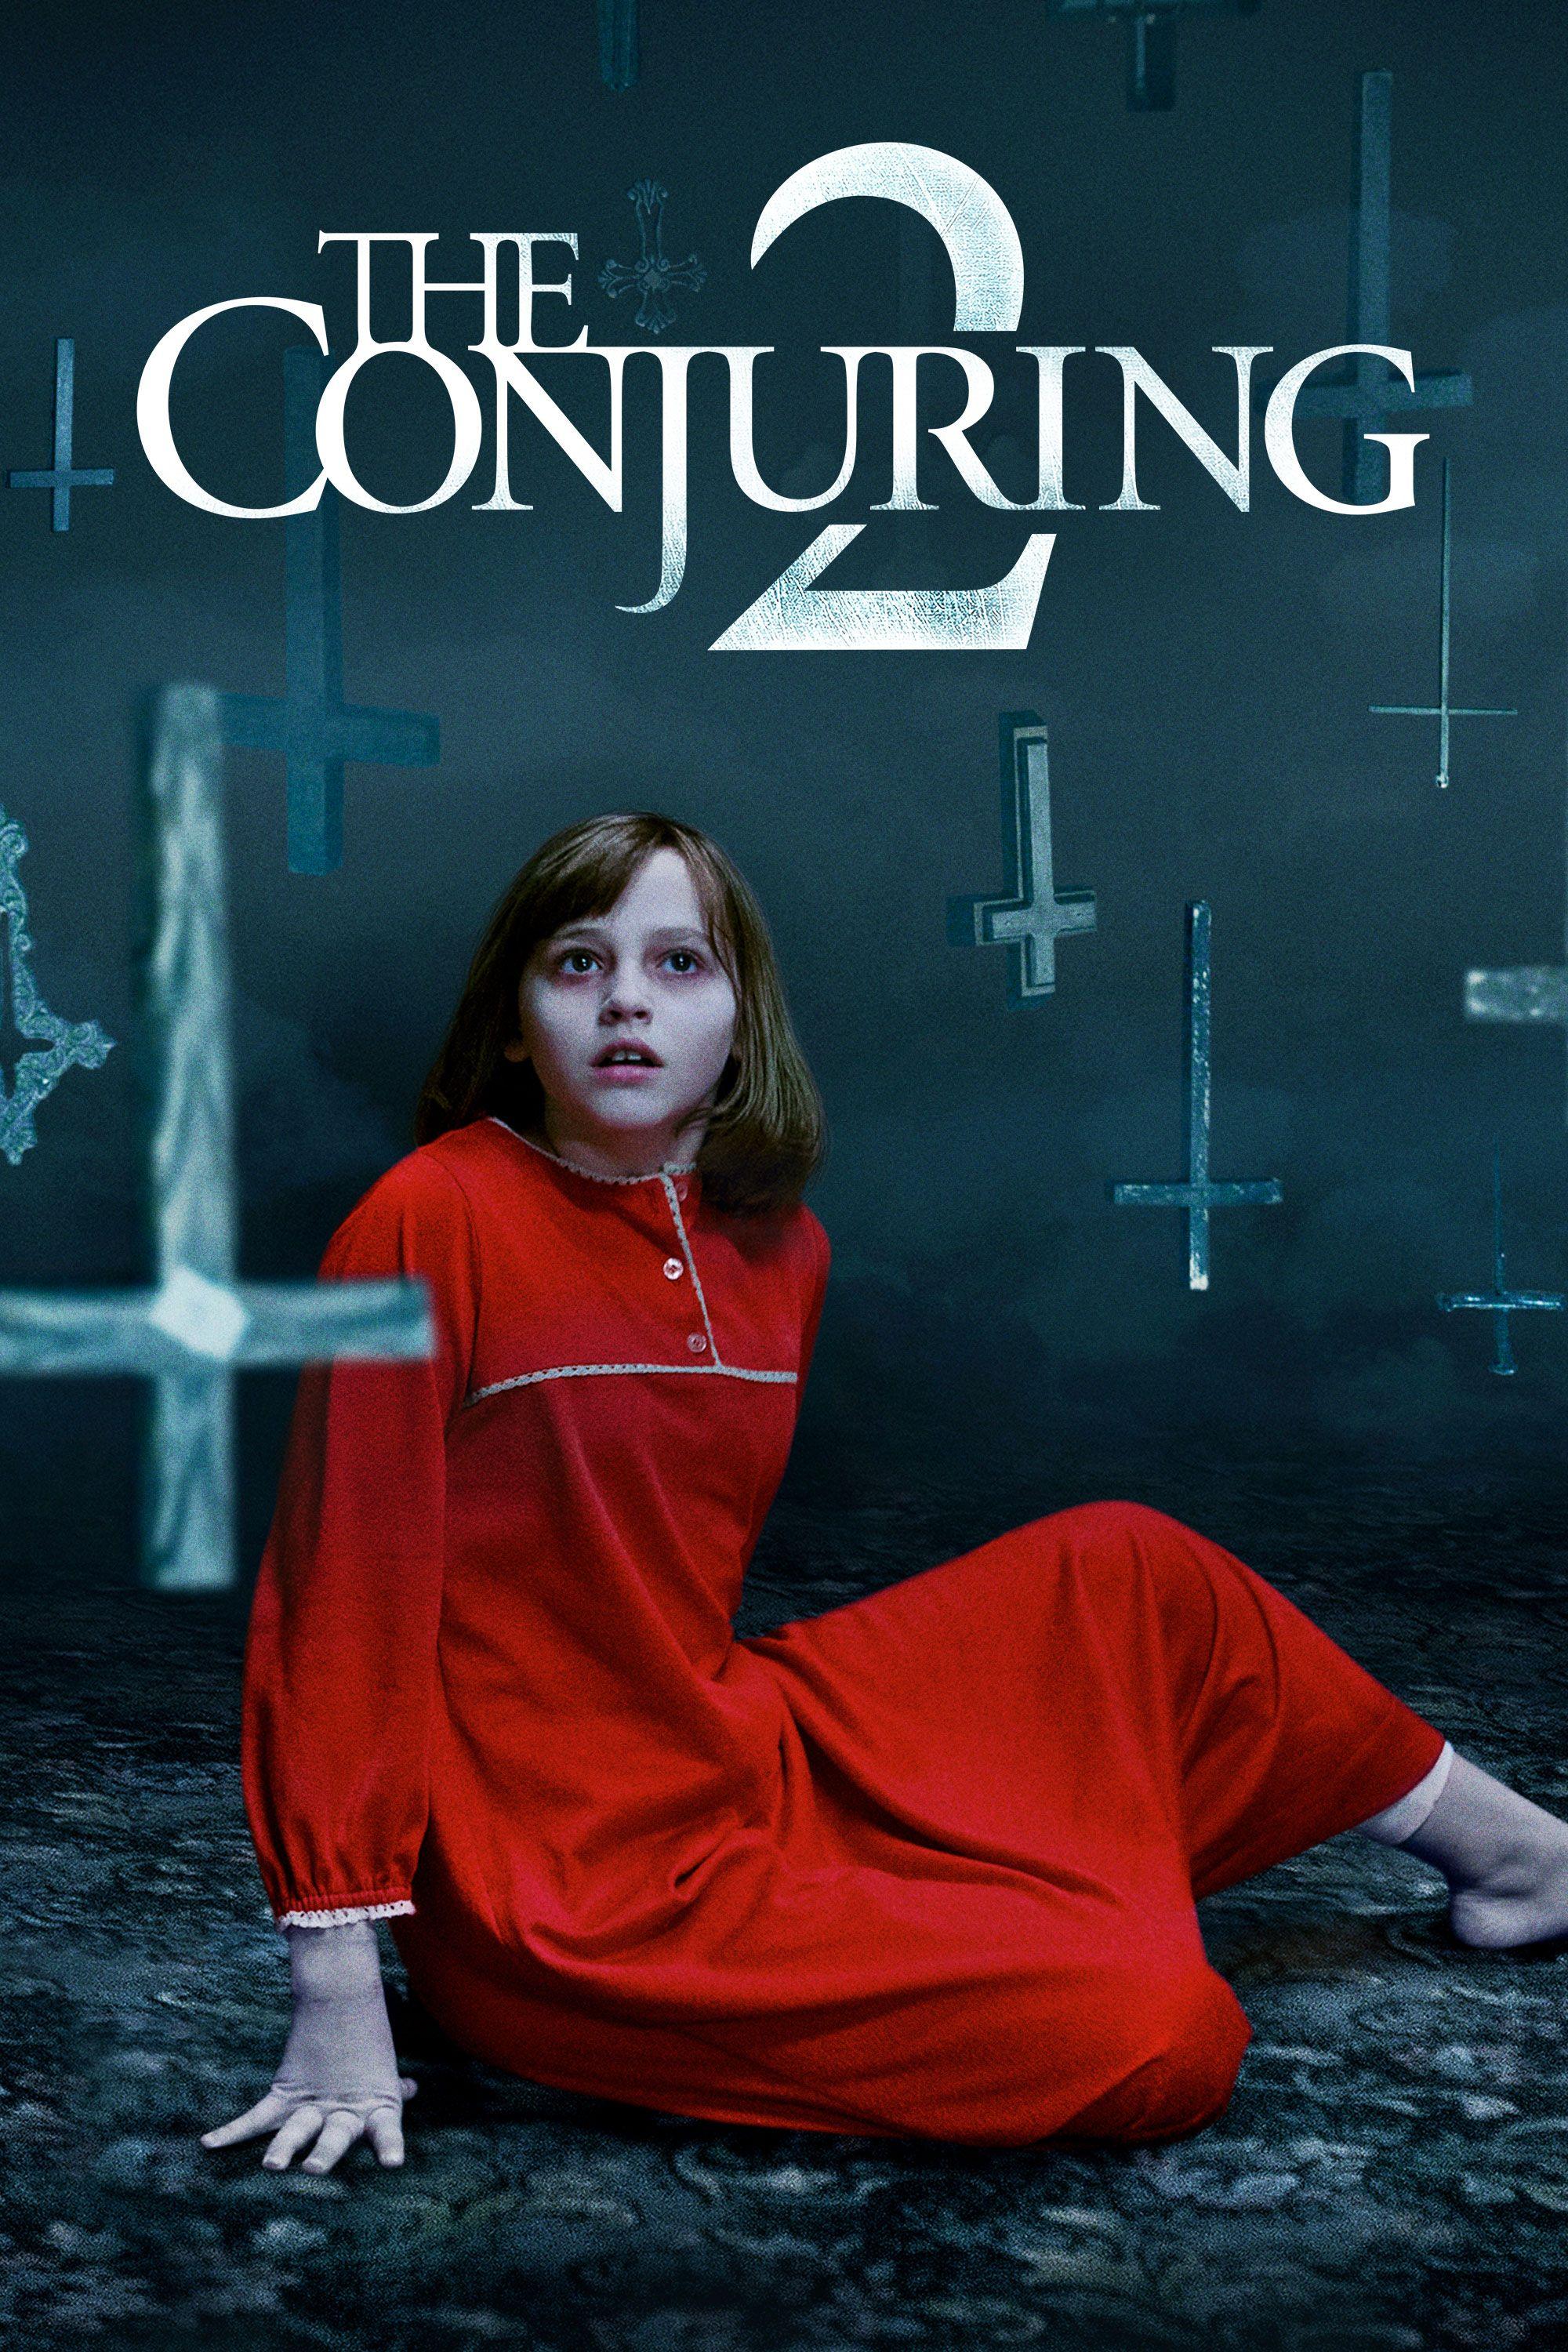 The Conjuring 2: Ed and Lorraine Warren return with another chilling case as they travel to London to assist a desperate mother and her children who are tormented by malevolent spirits in their haunted house.